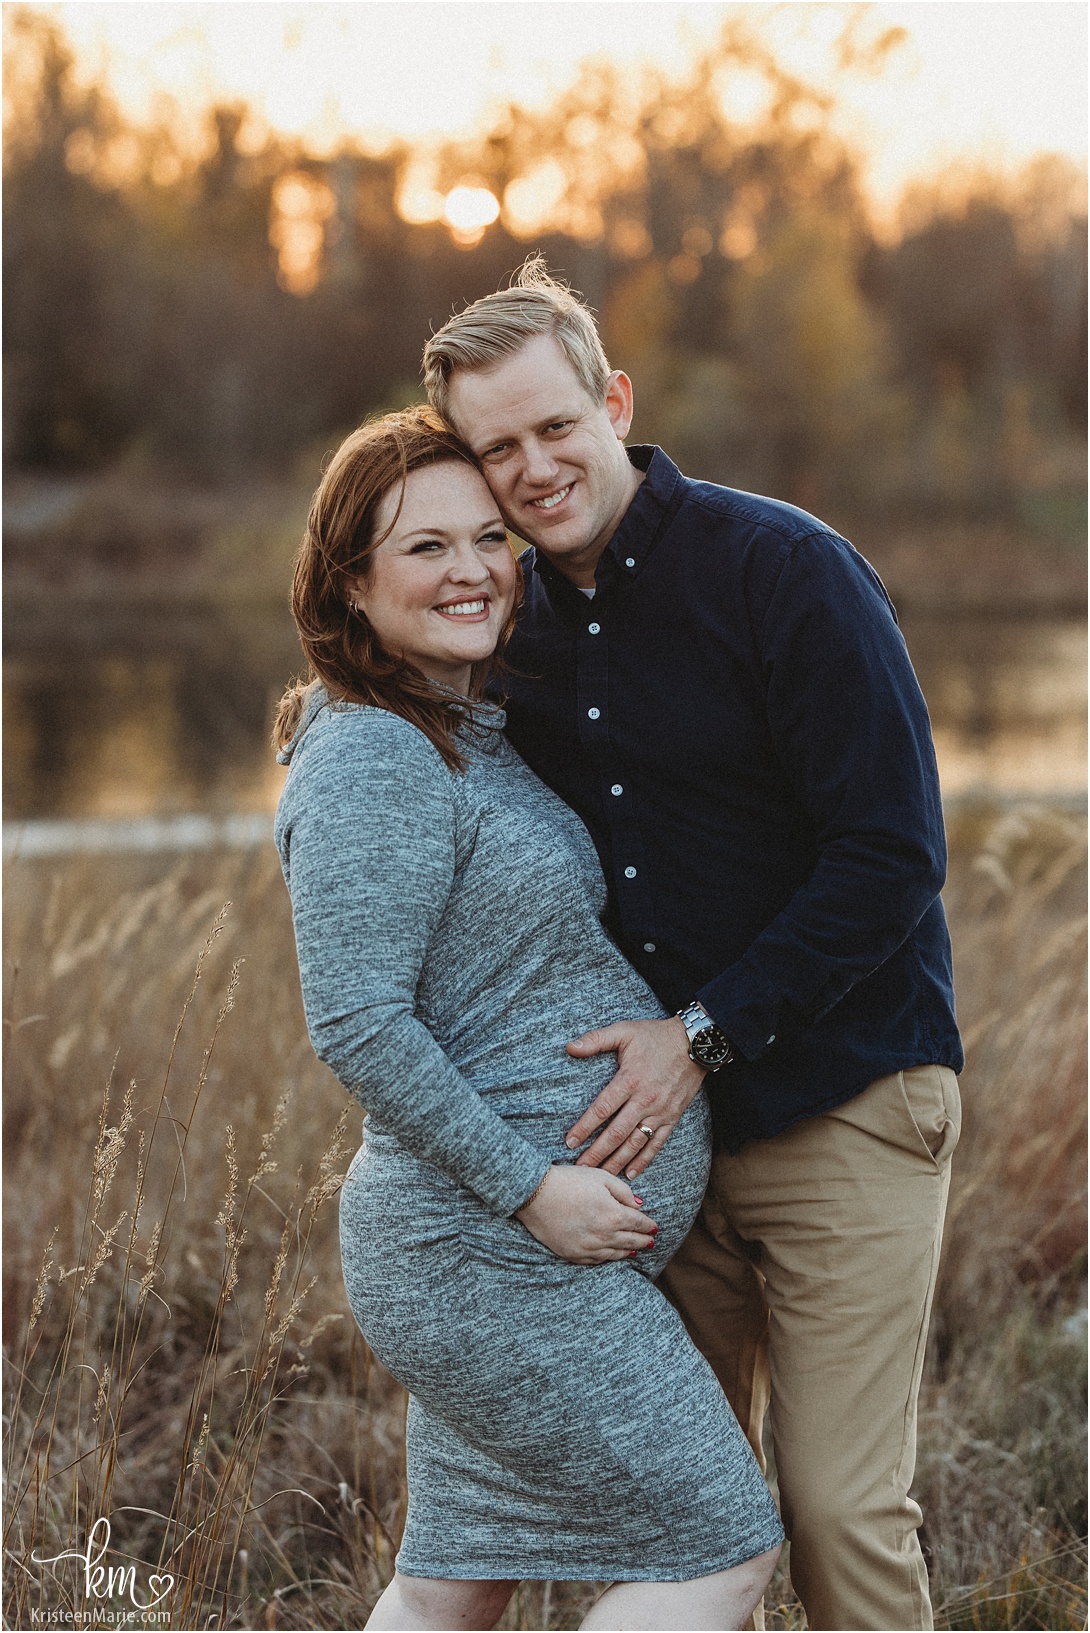 adorable expecting couple - maternity photography